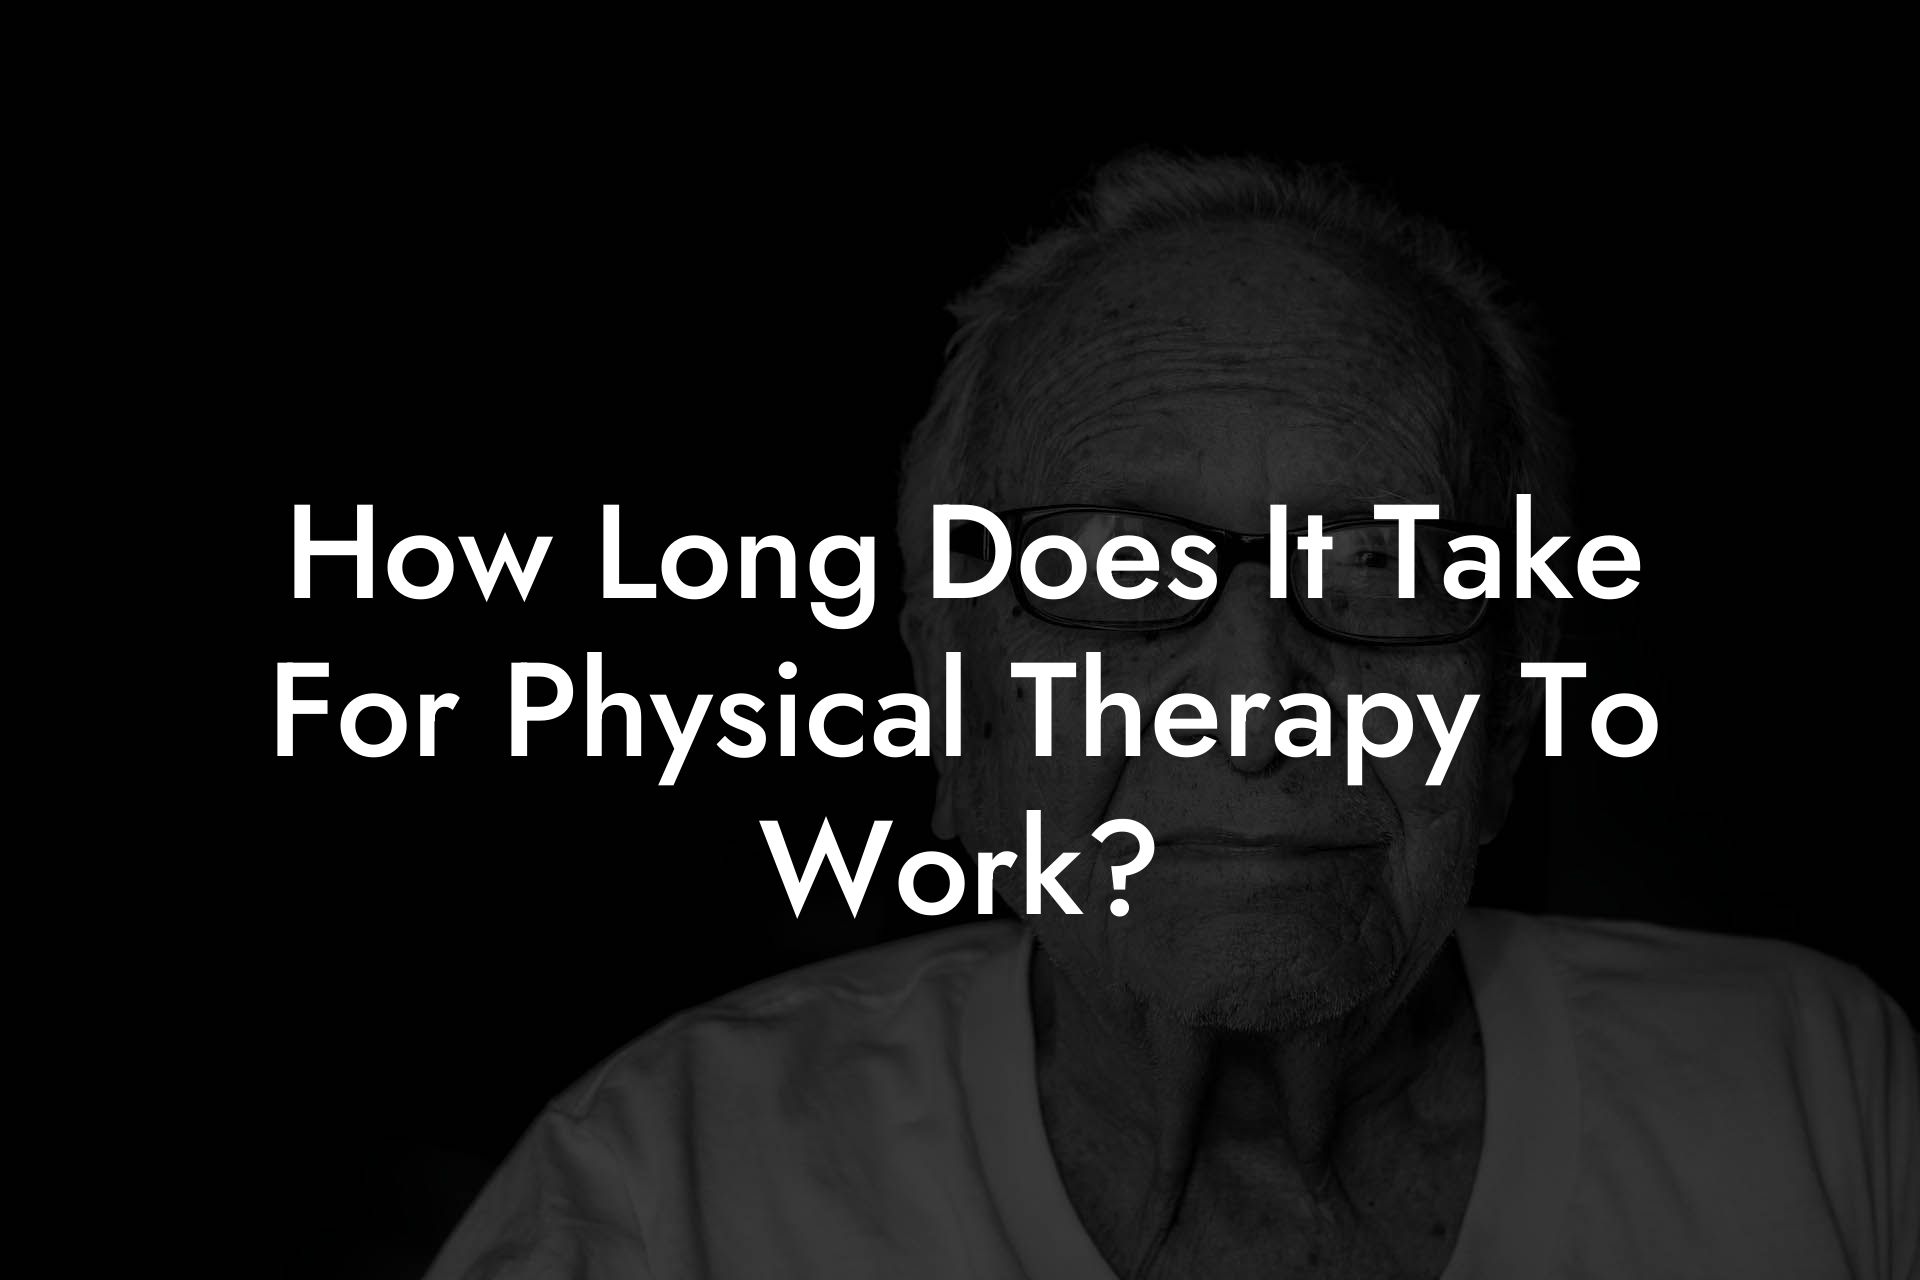 How Long Does It Take For Physical Therapy To Work?